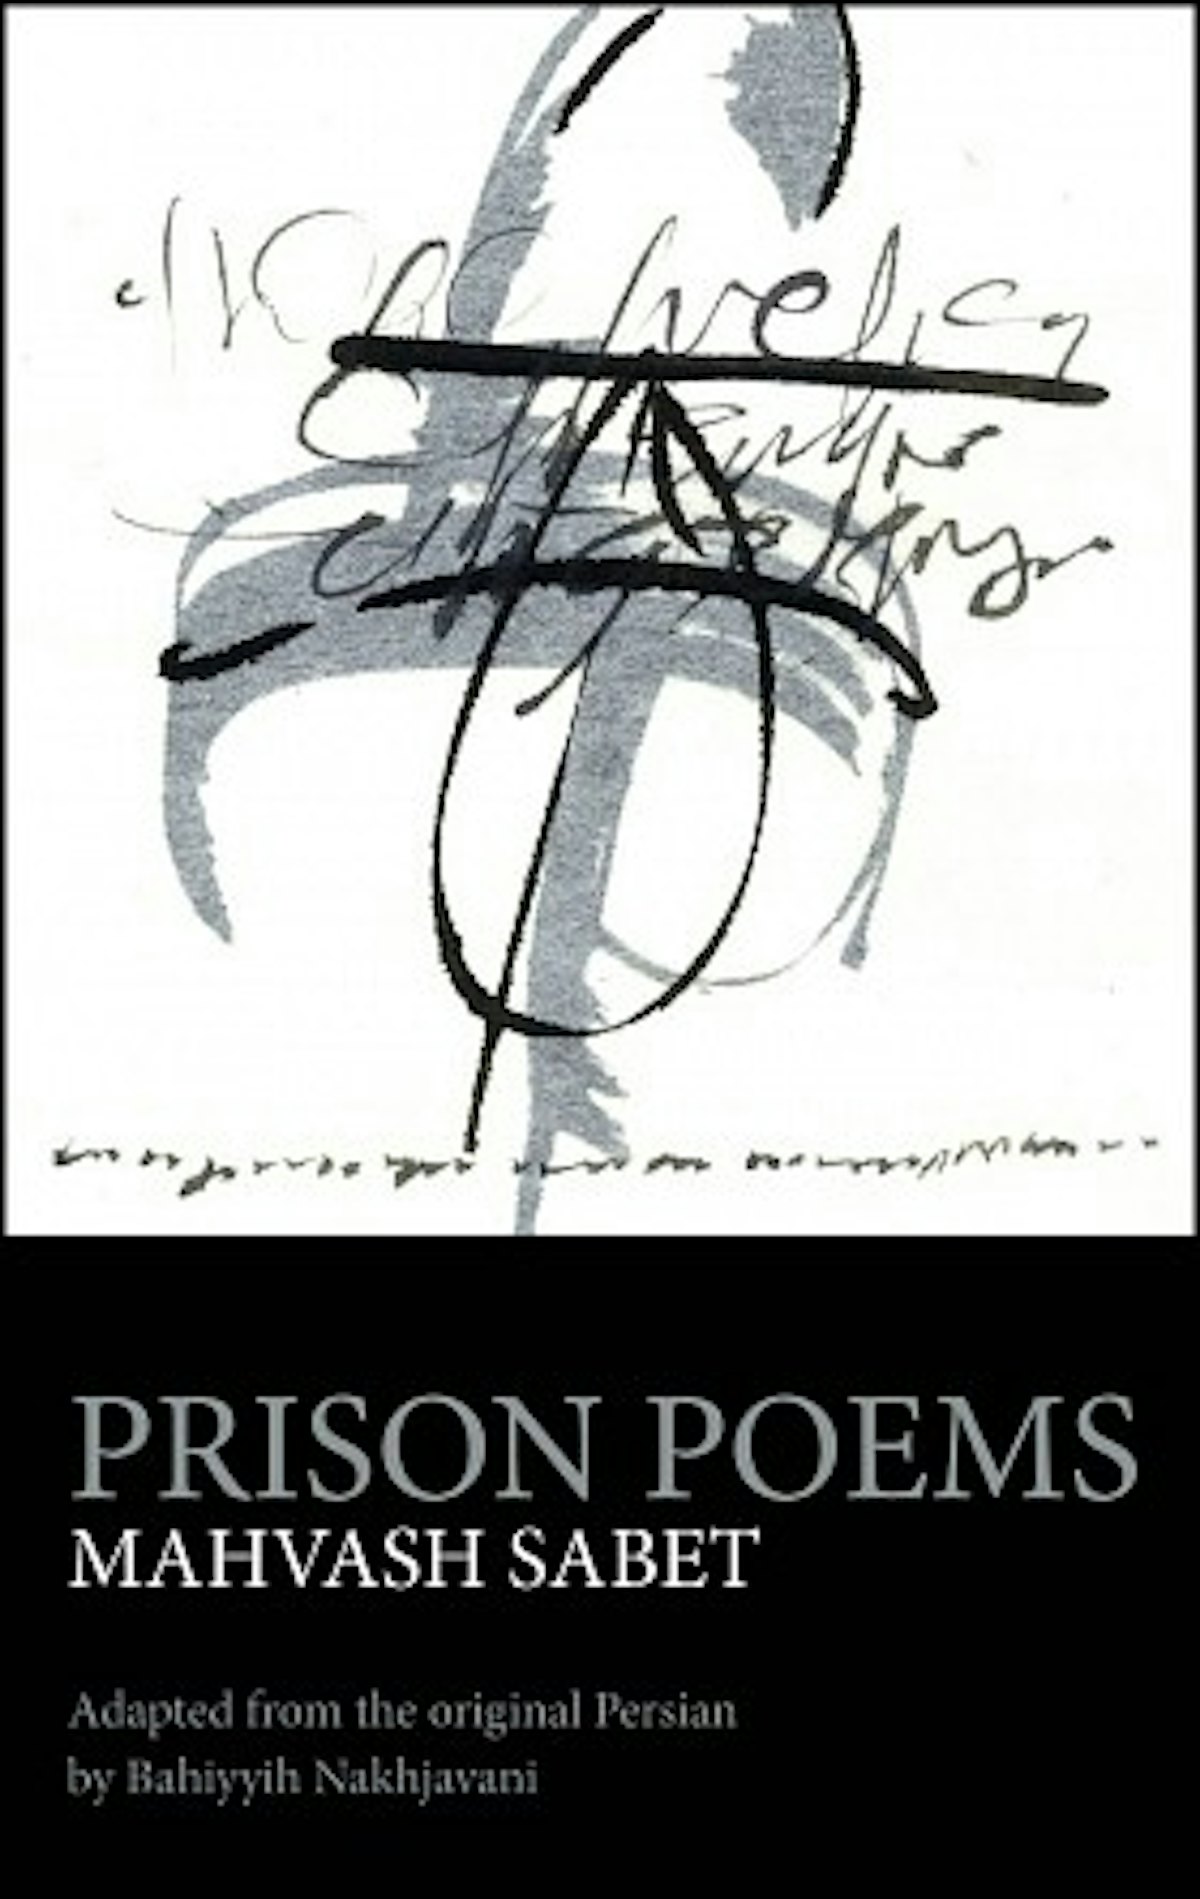 Ms. Sabet's book of poetry, "Prison Poems", recounts her experiences in prison, and was published in 2013.